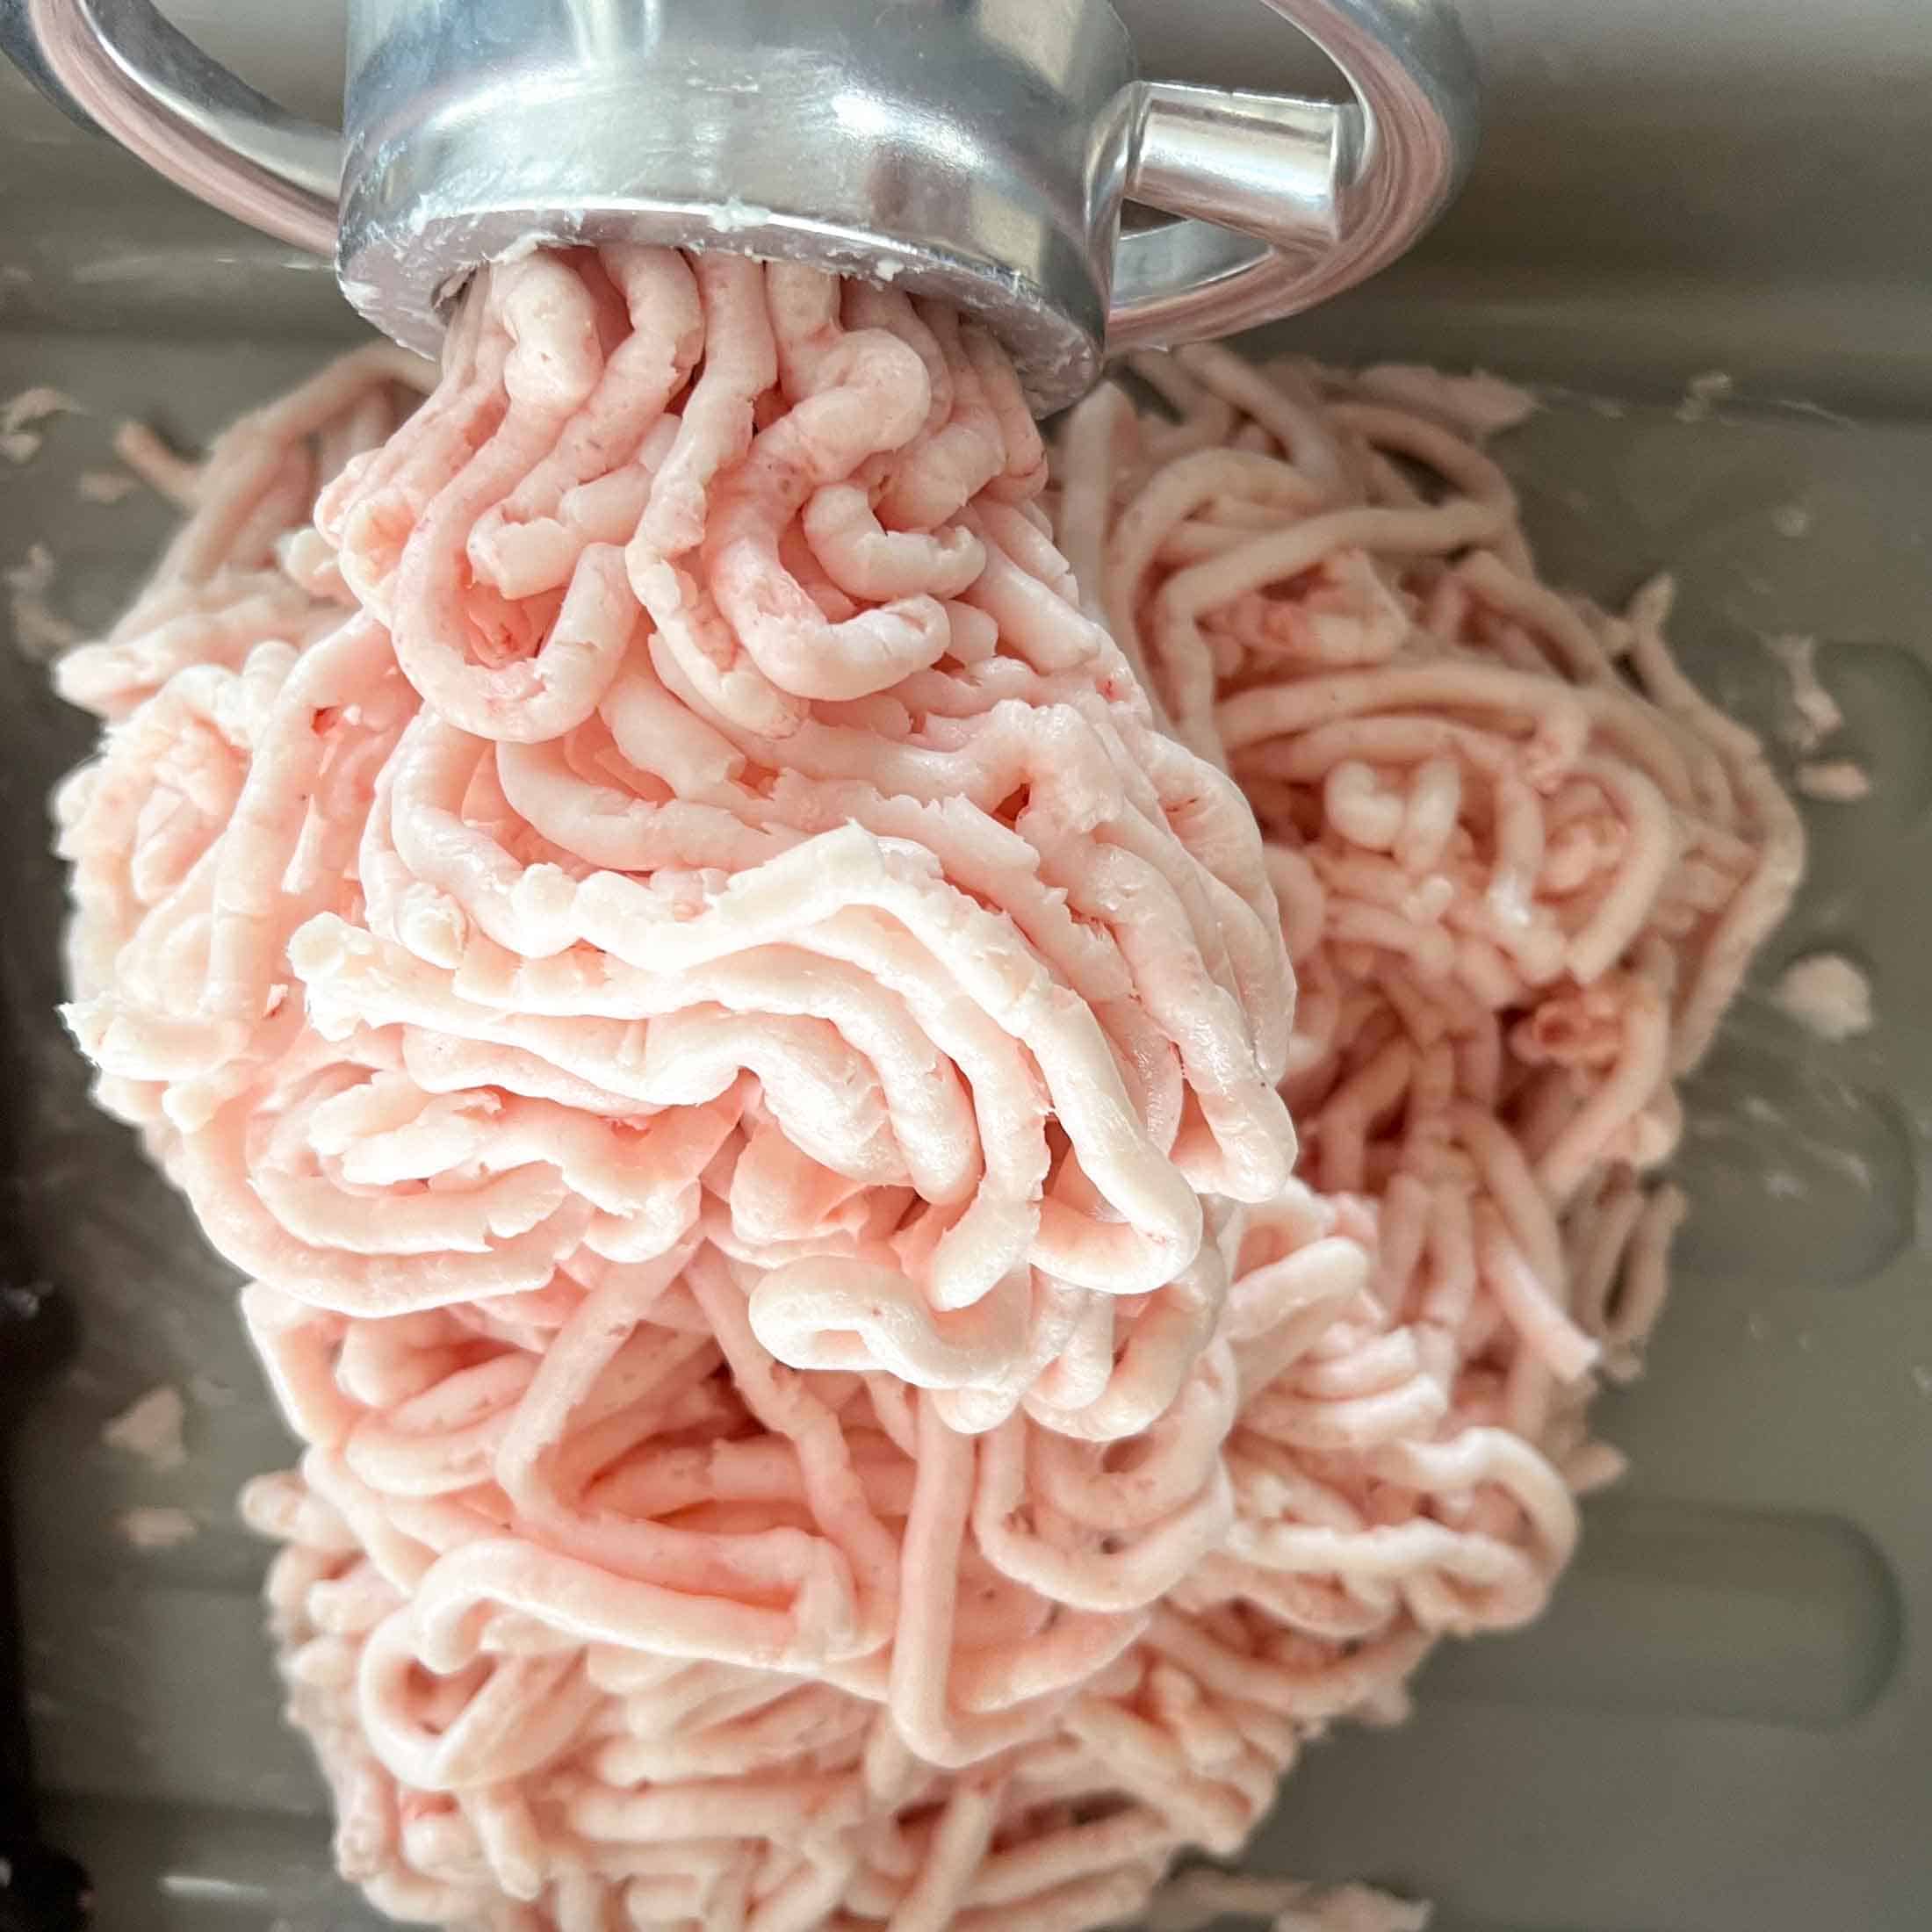 Ground pork lard coming out of the end of a meat grinder.